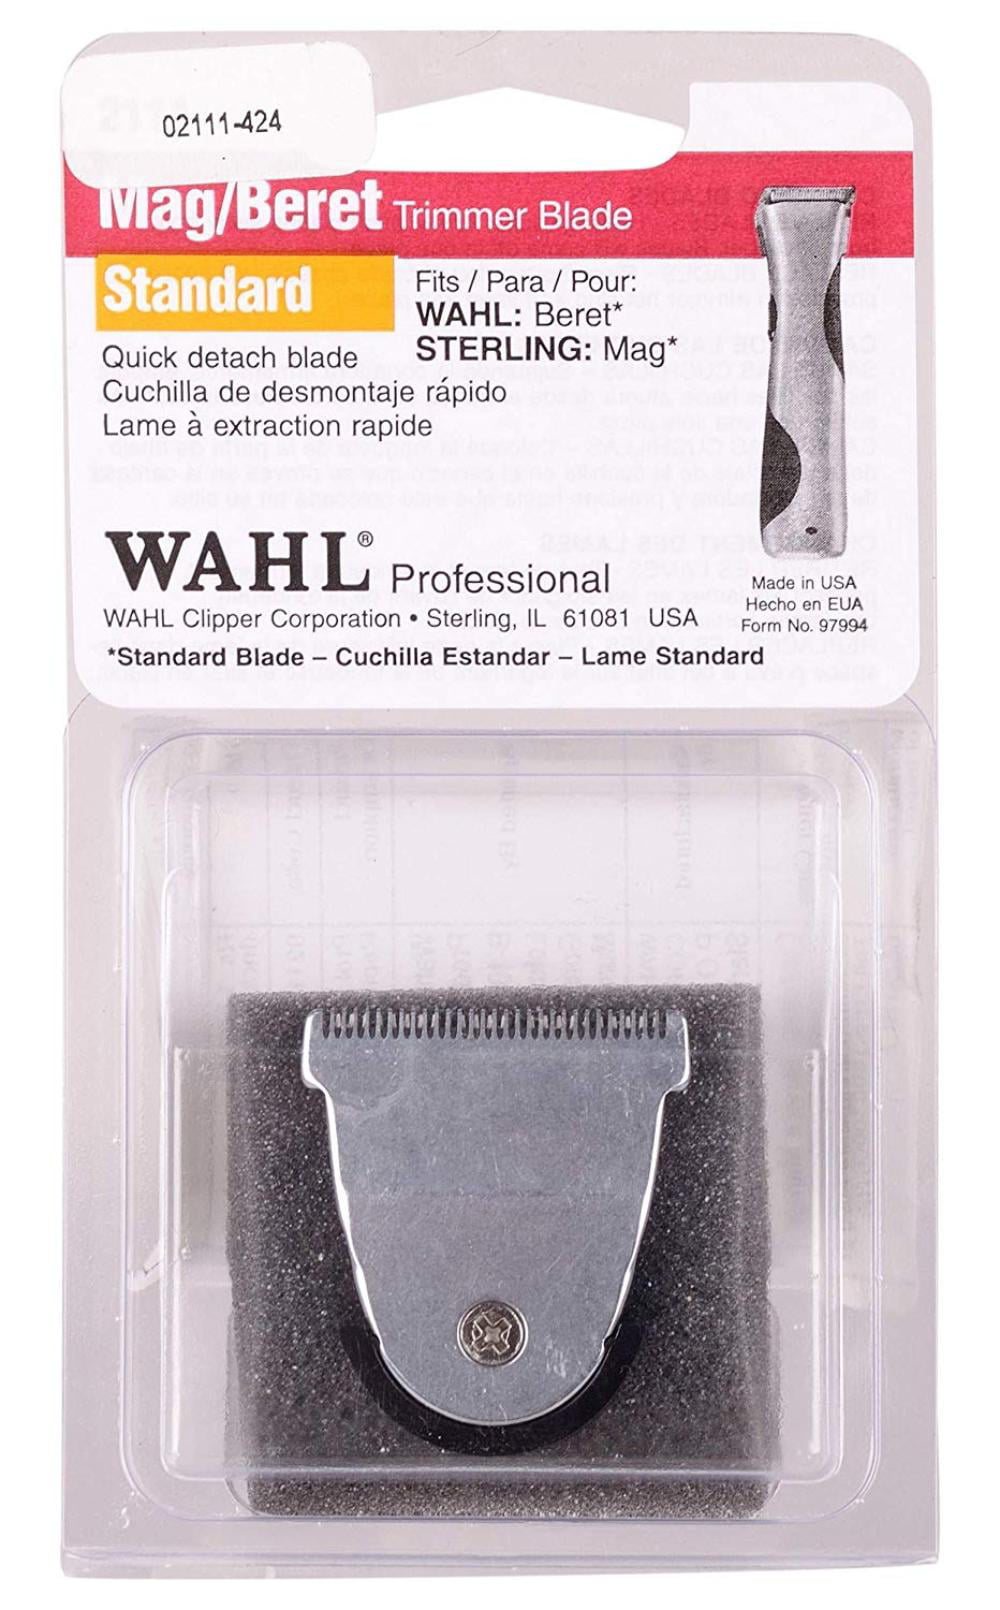 wahl sterling mag trimmer replacement blade